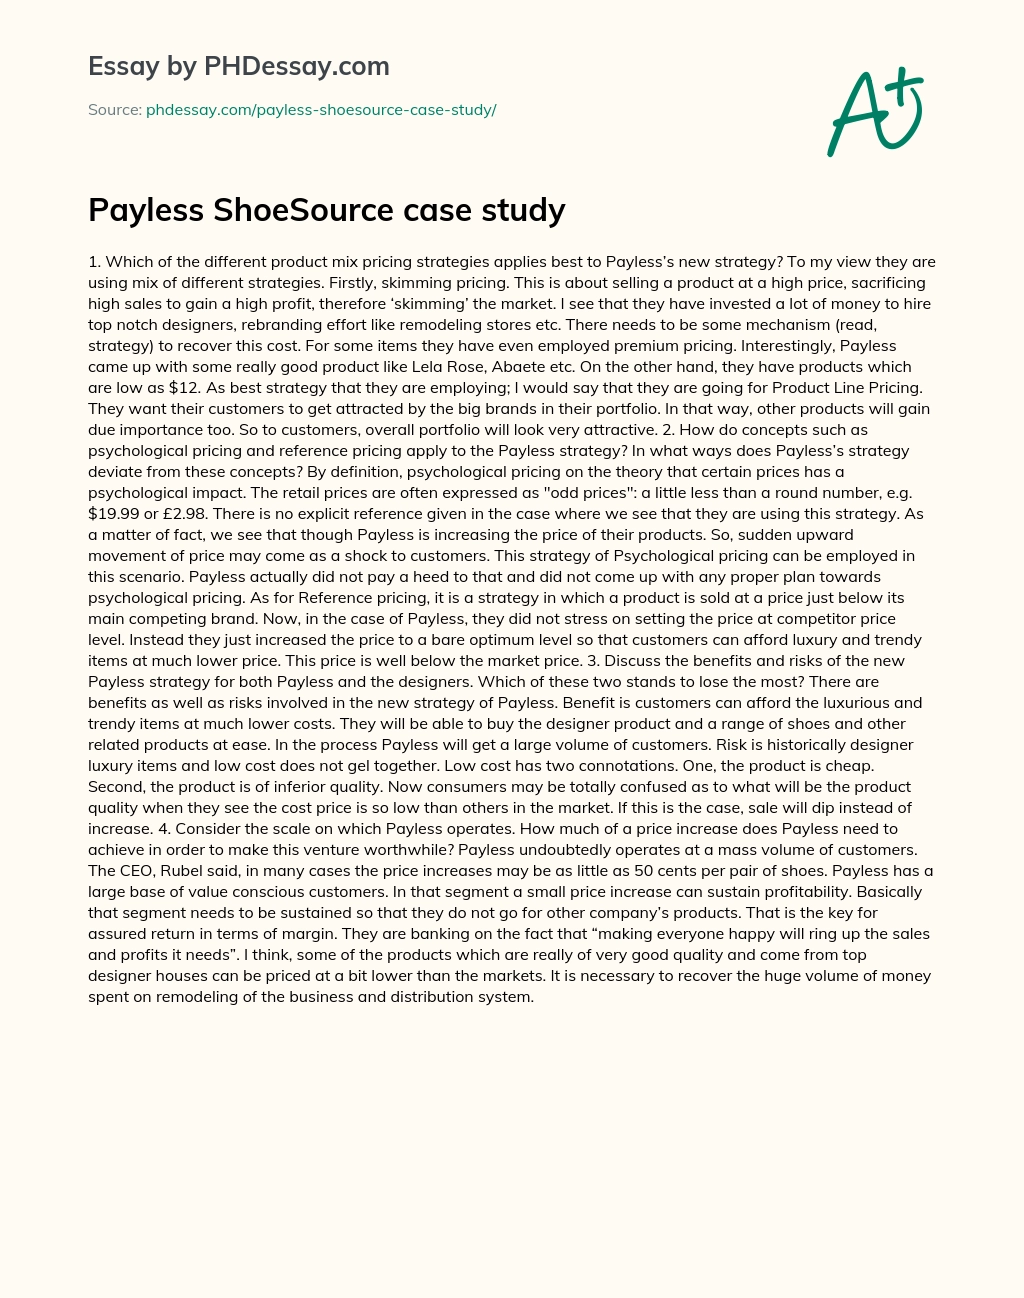 Payless ShoeSource case study essay